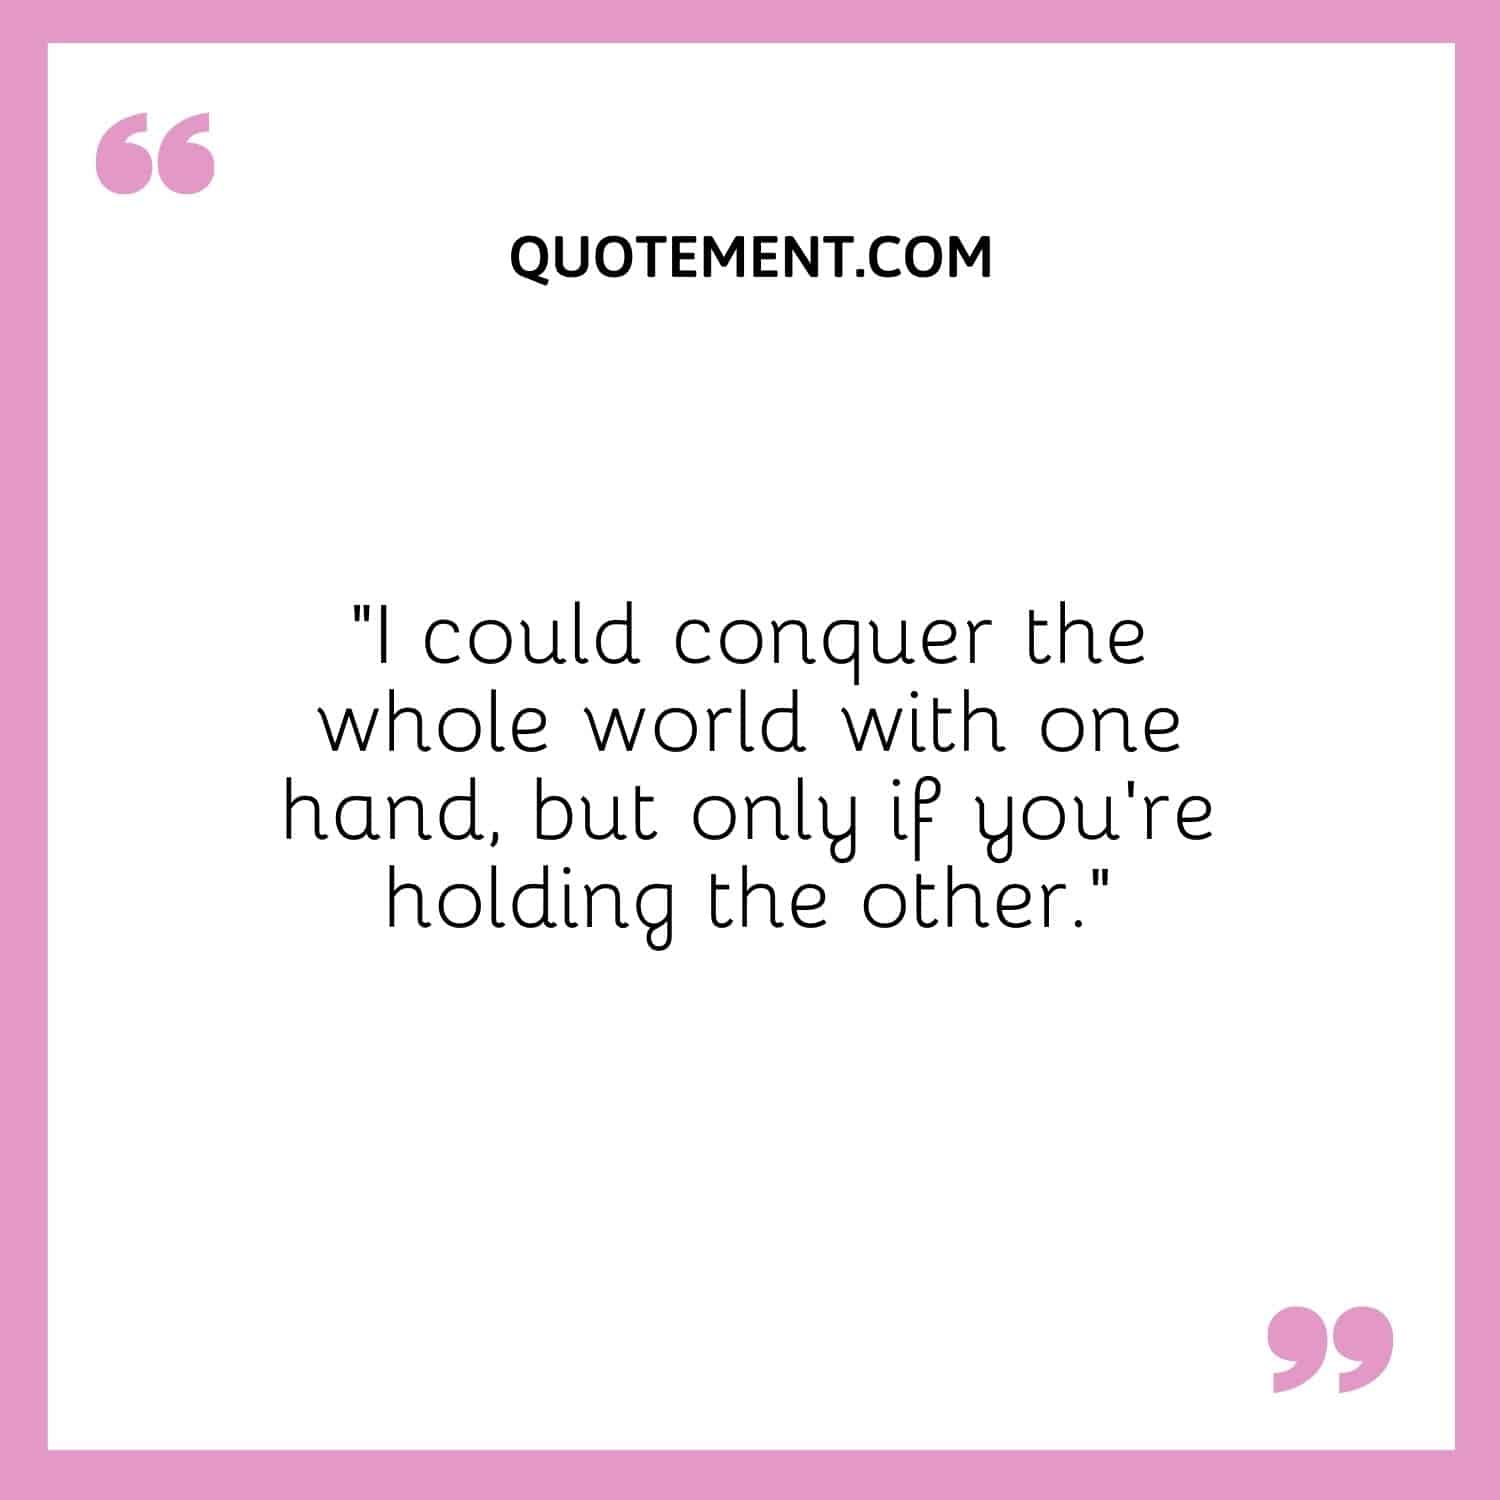 I could conquer the whole world with one hand, but only if you're holding the other.